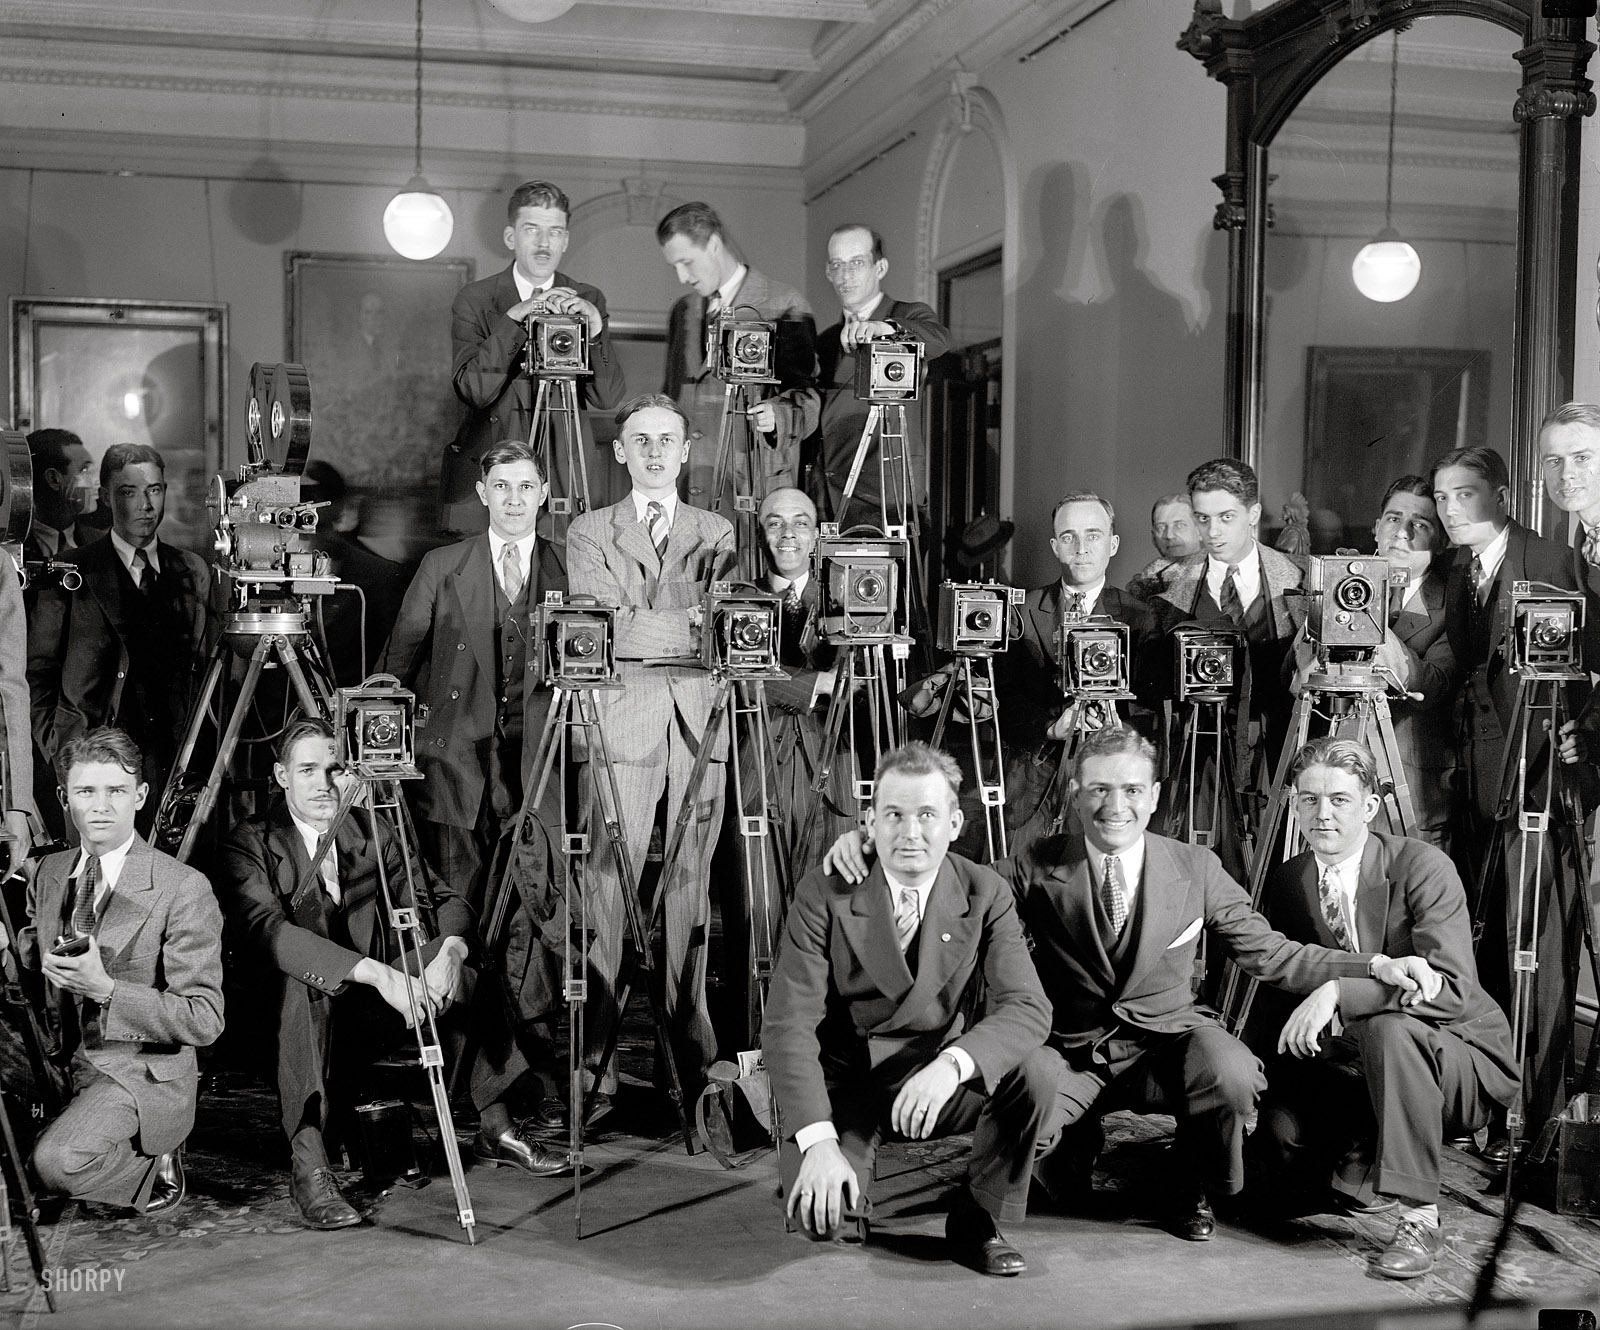 March 28, 1929. "Cameramen, Stimson office." Photographers on the occasion of Henry Stimson's swearing-in as Secretary of State. Nat'l Photo. View full size.